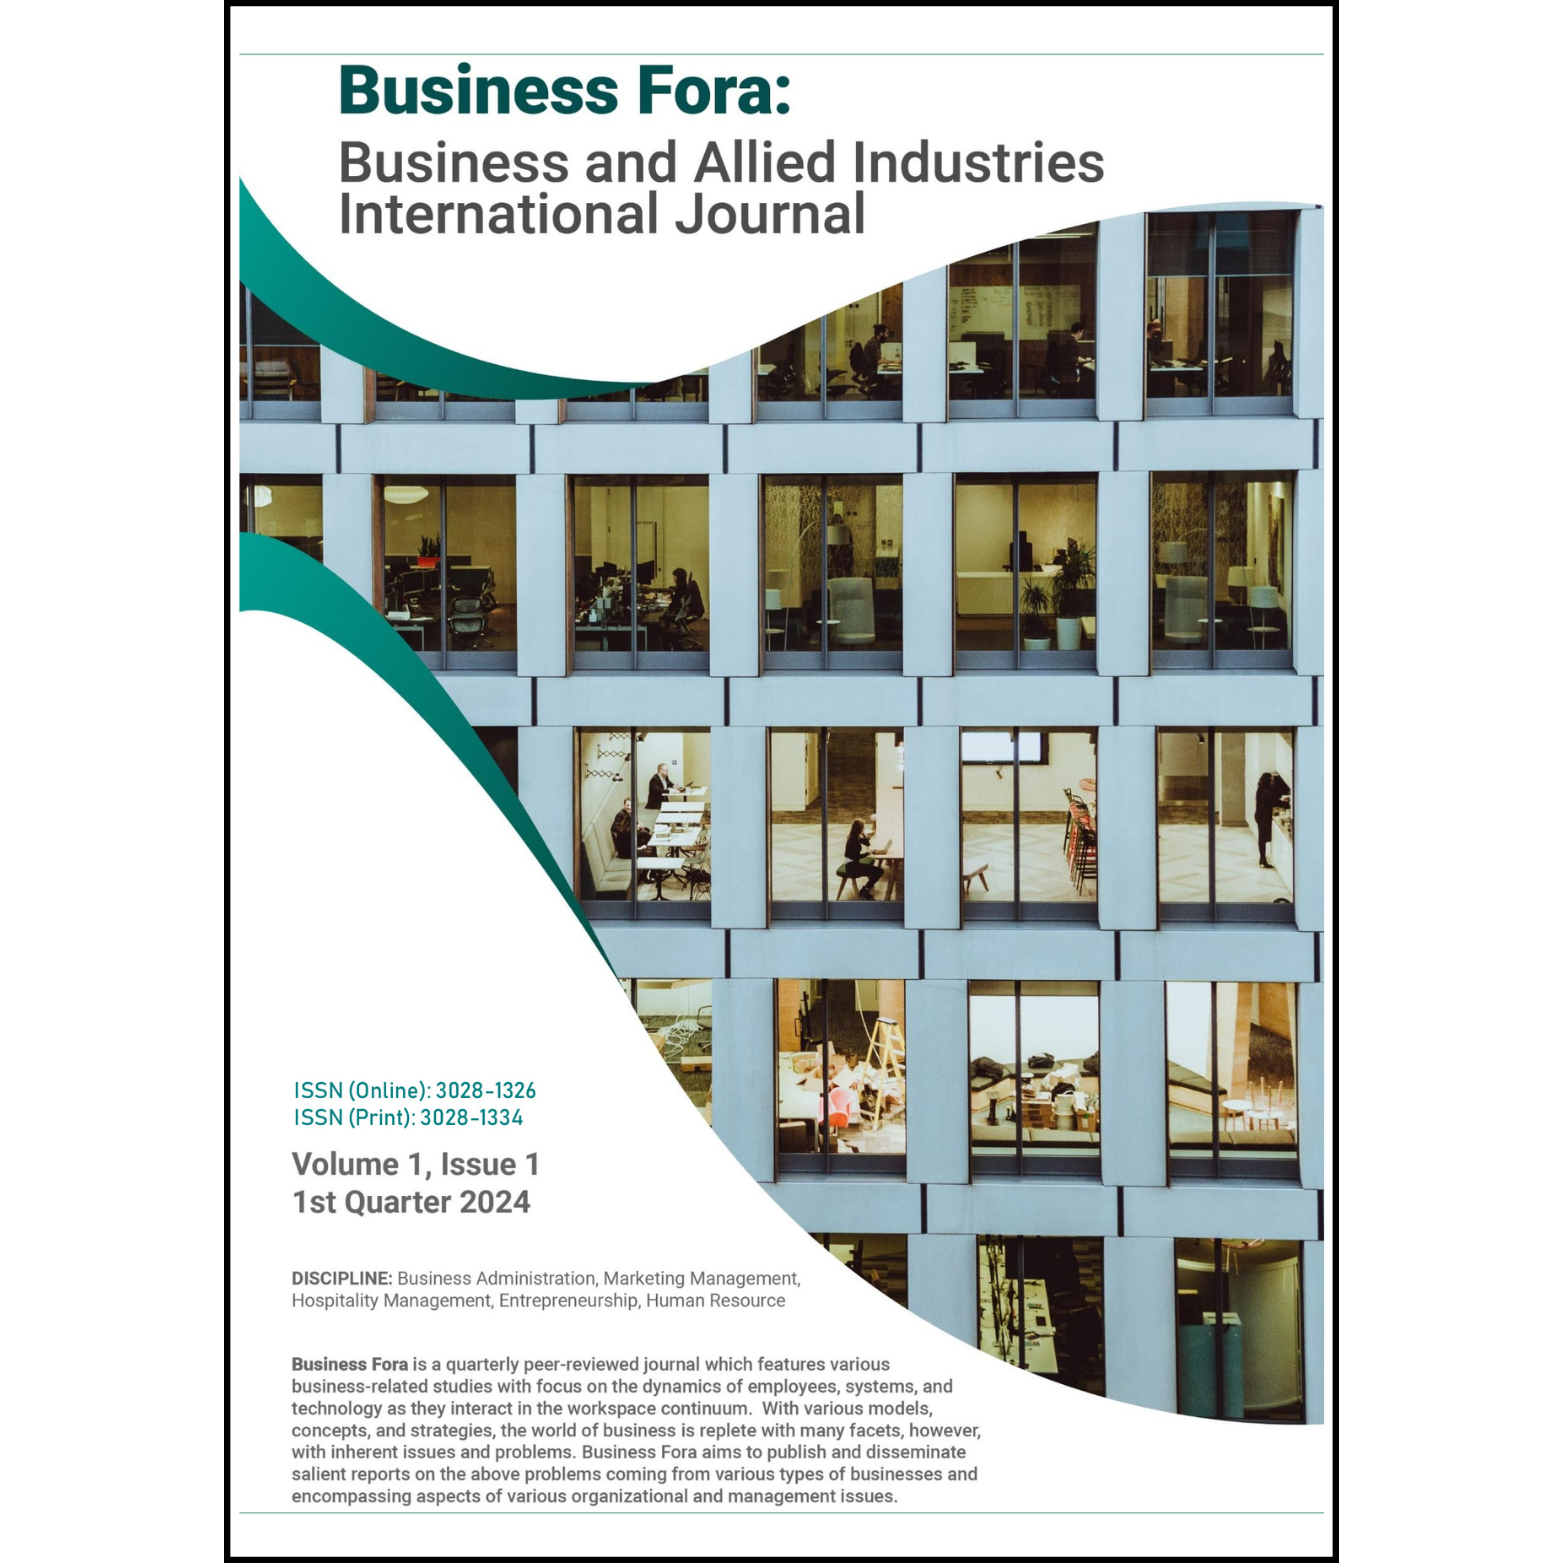 Business Fora: Business and Allied Industries International Journal